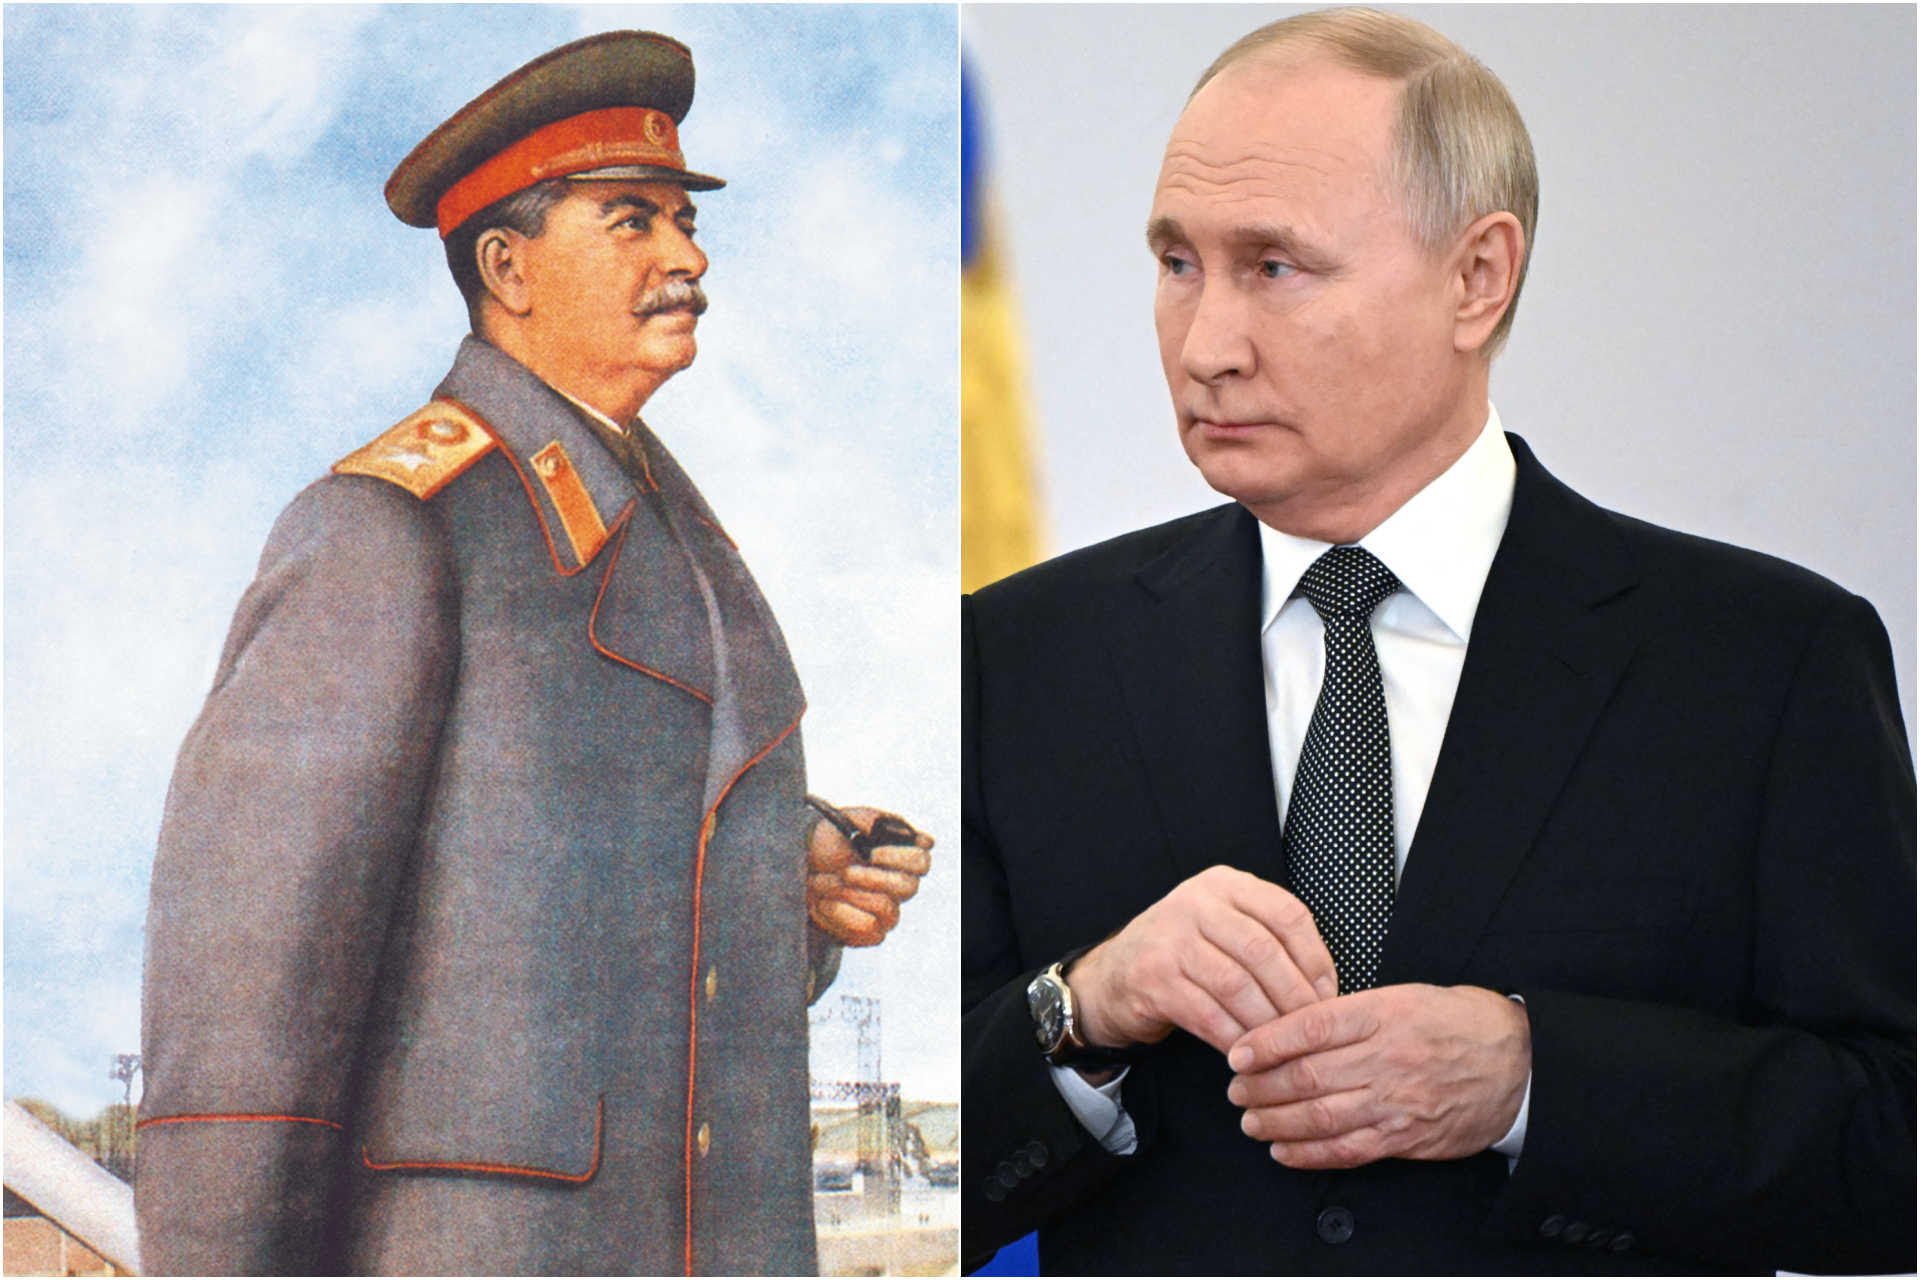 Putin is about to exceed Stalin